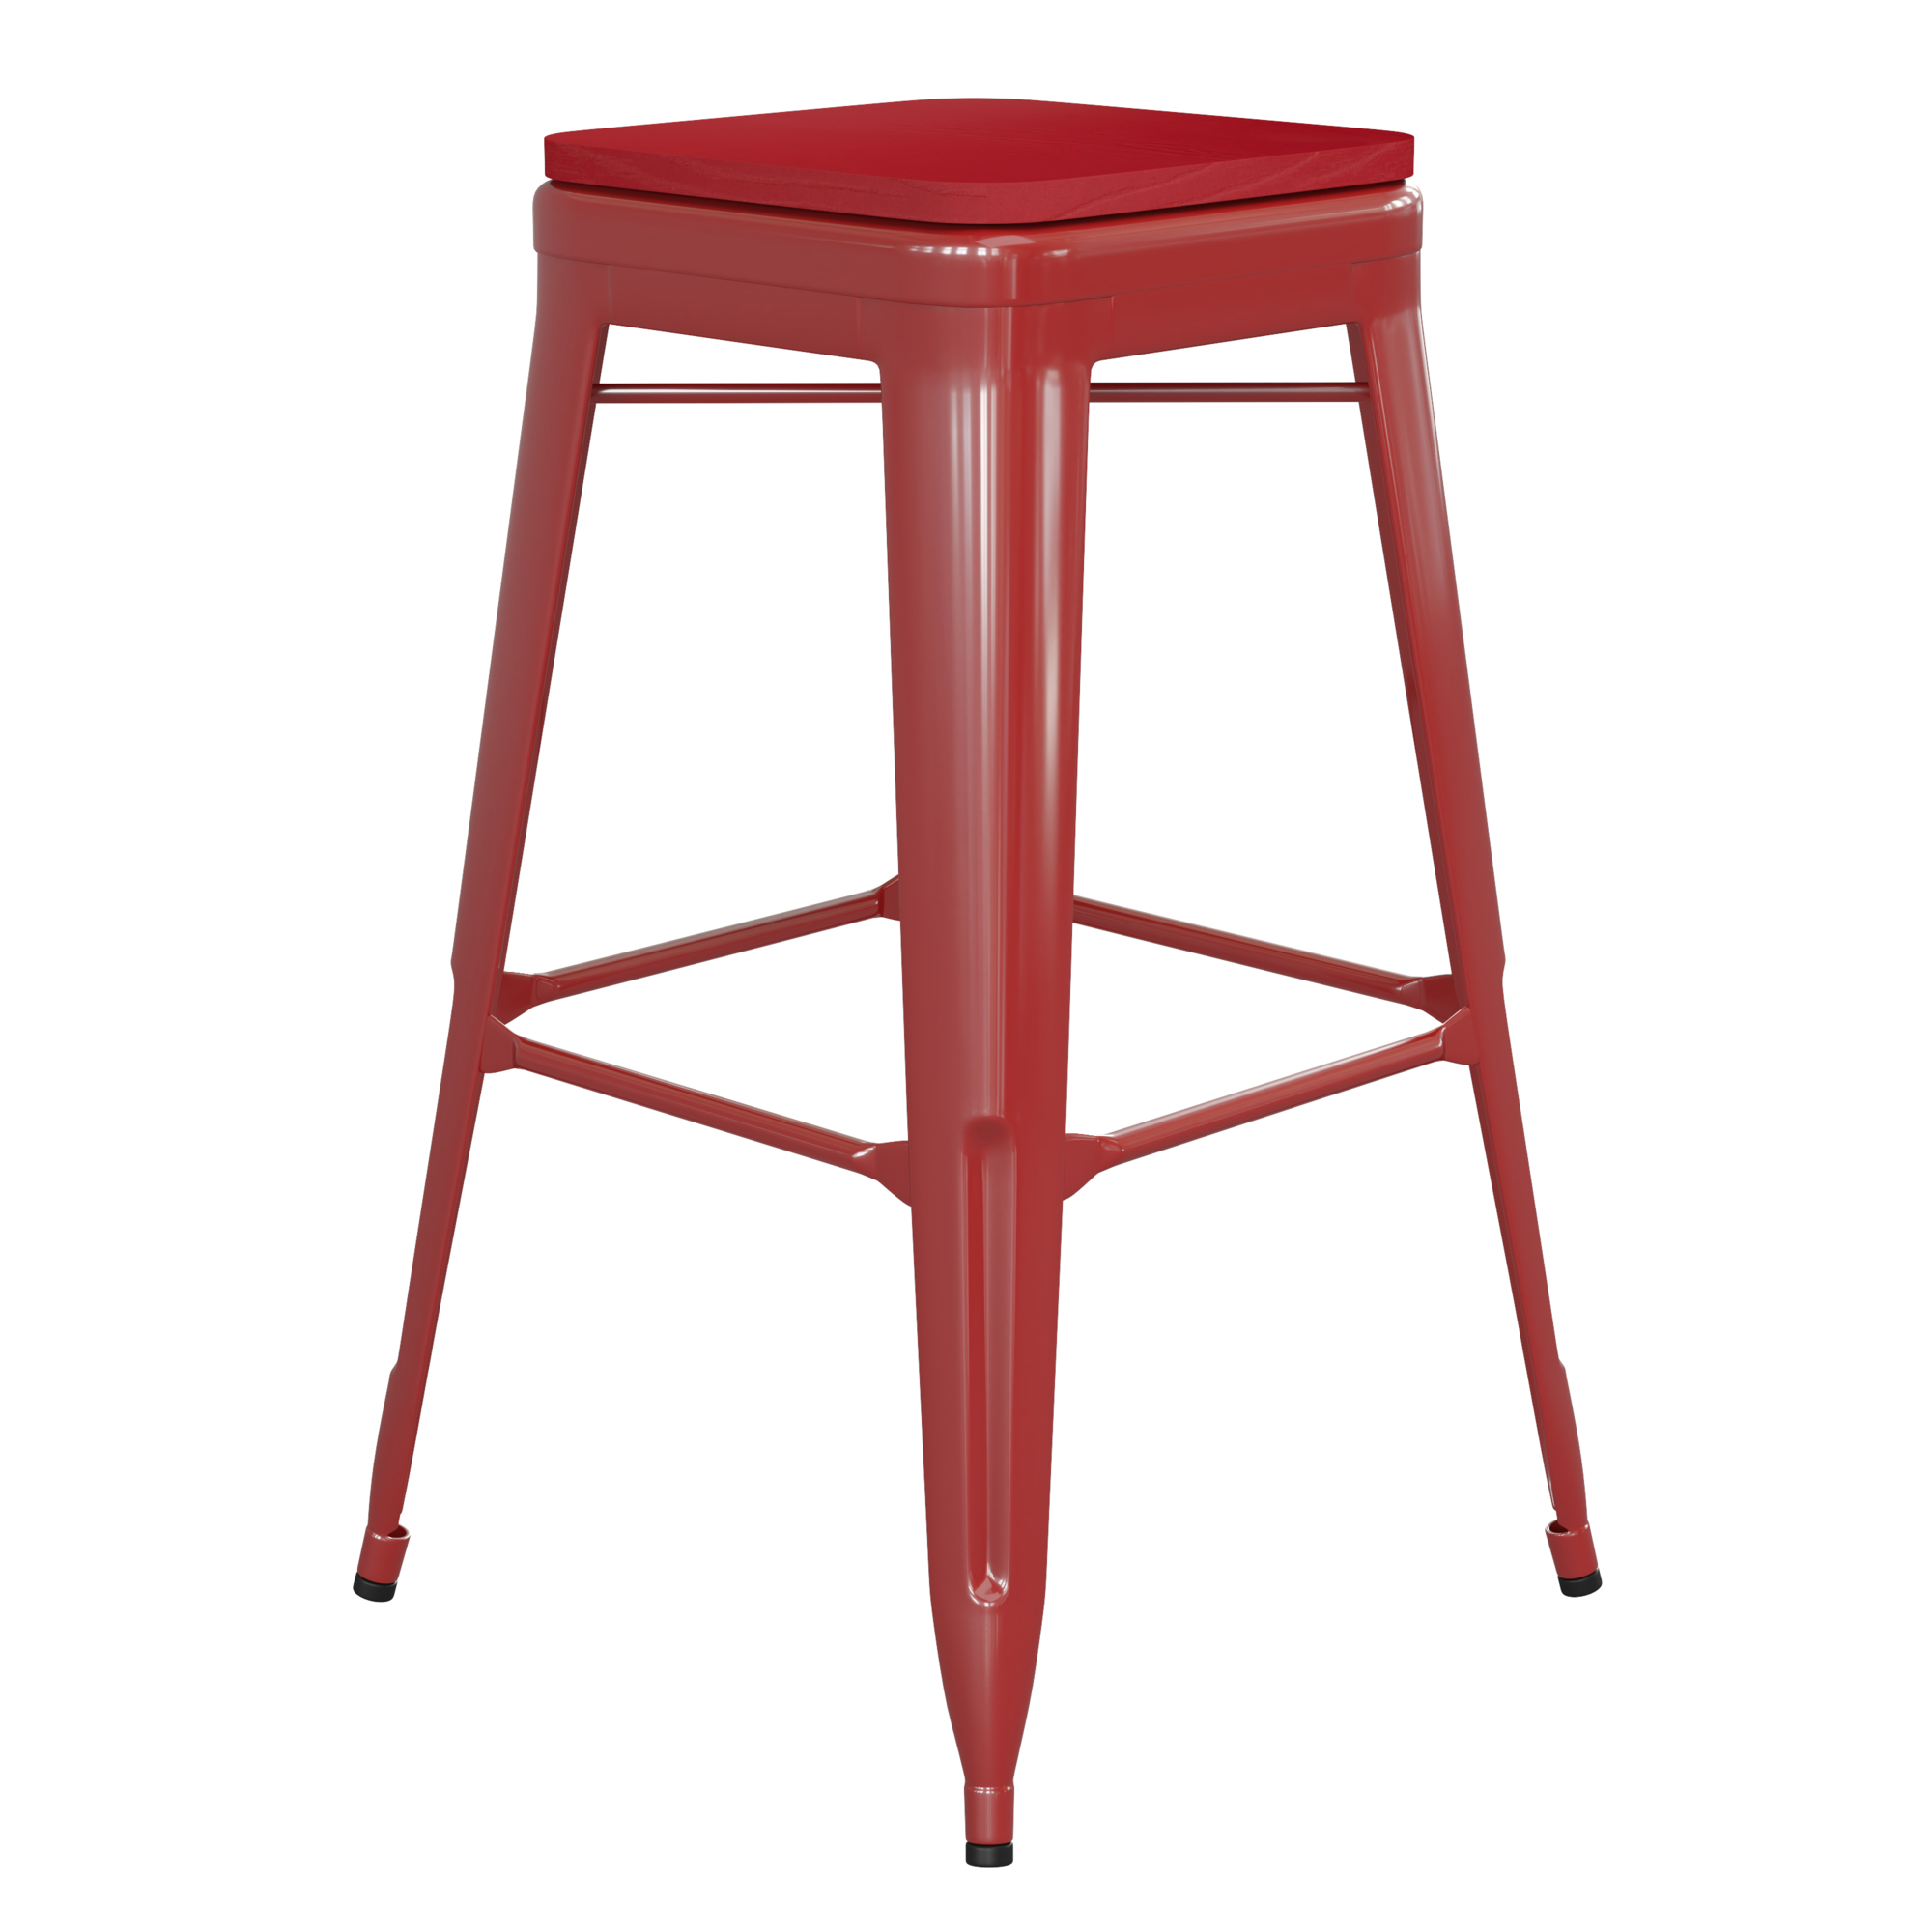 Flash Furniture, 30Inch Red Metal Stool-Red Poly Seat, Primary Color Red, Included (qty.) 1, Model CH3132030RPL2R